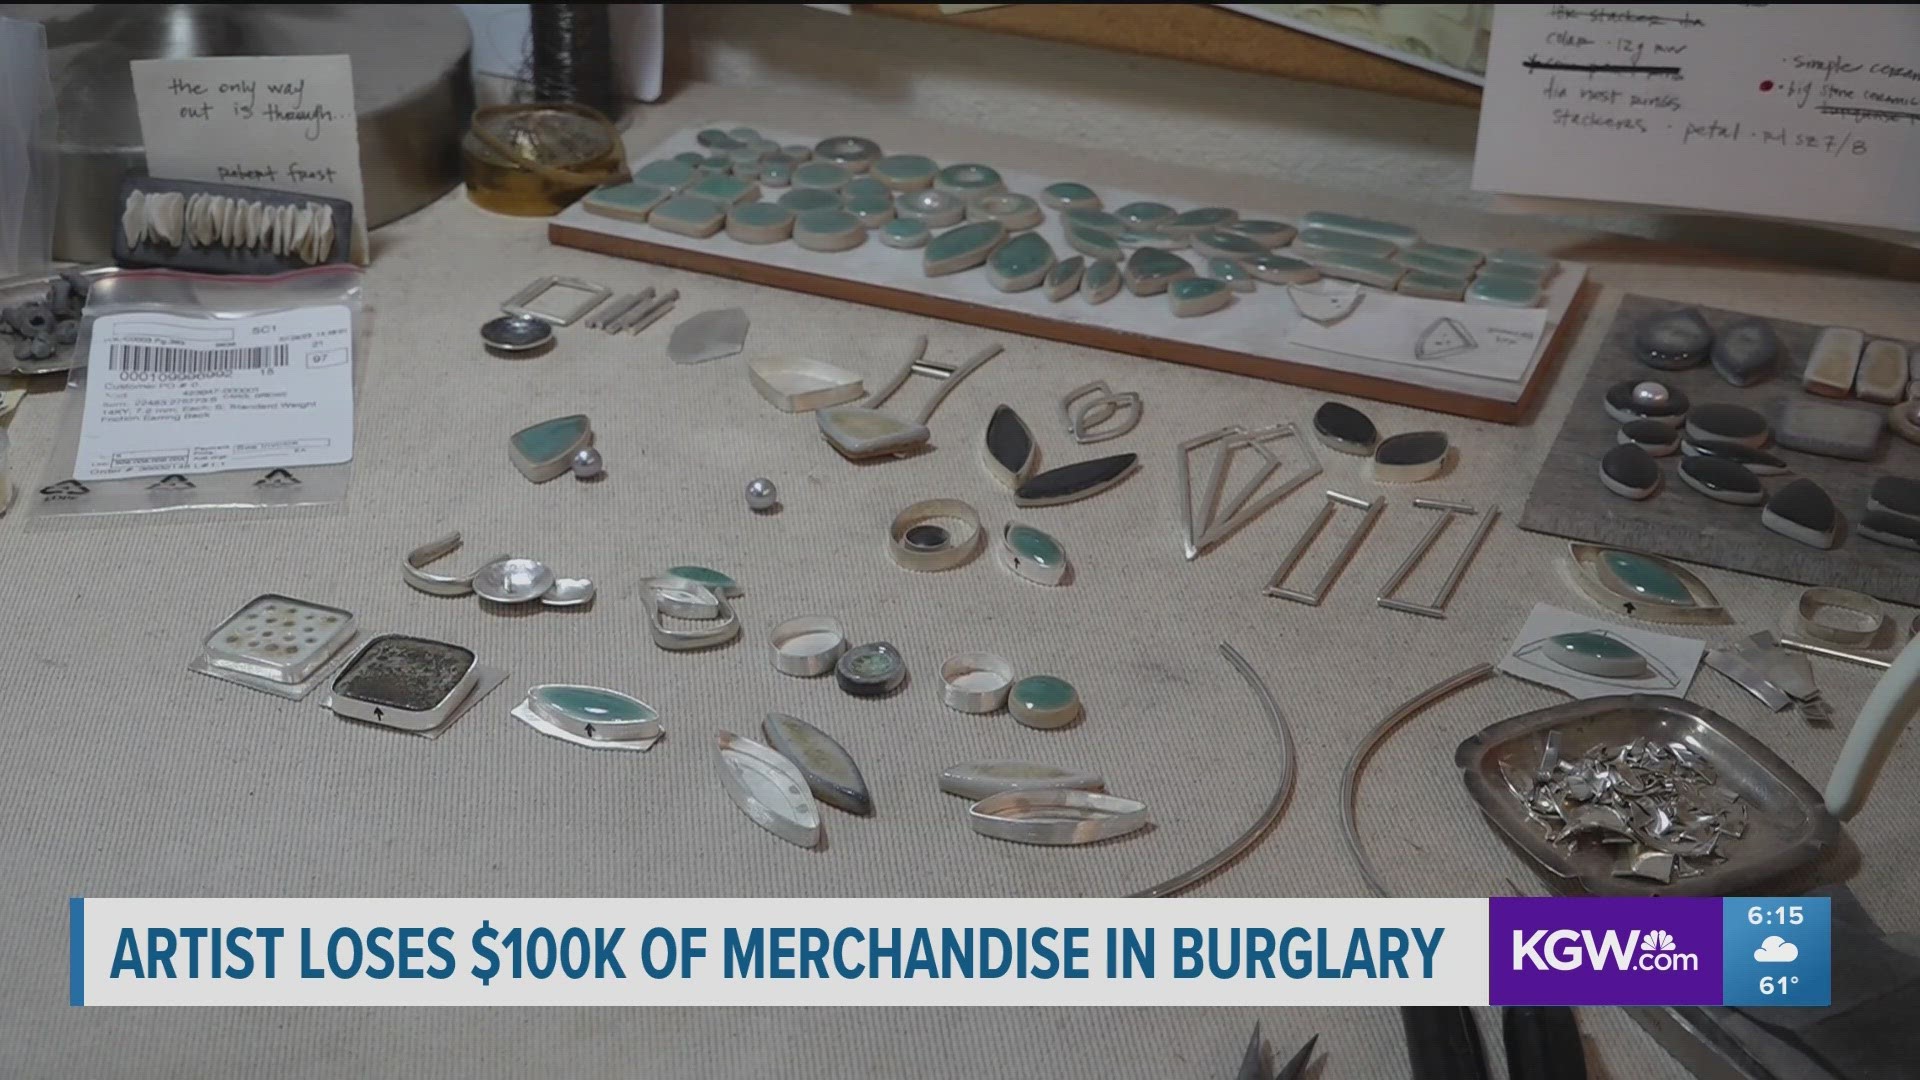 Thieves broke into the artist’s studio in Southeast Portland. They stole a safe full of jewelry and gemstones worth tens of thousands of dollars.